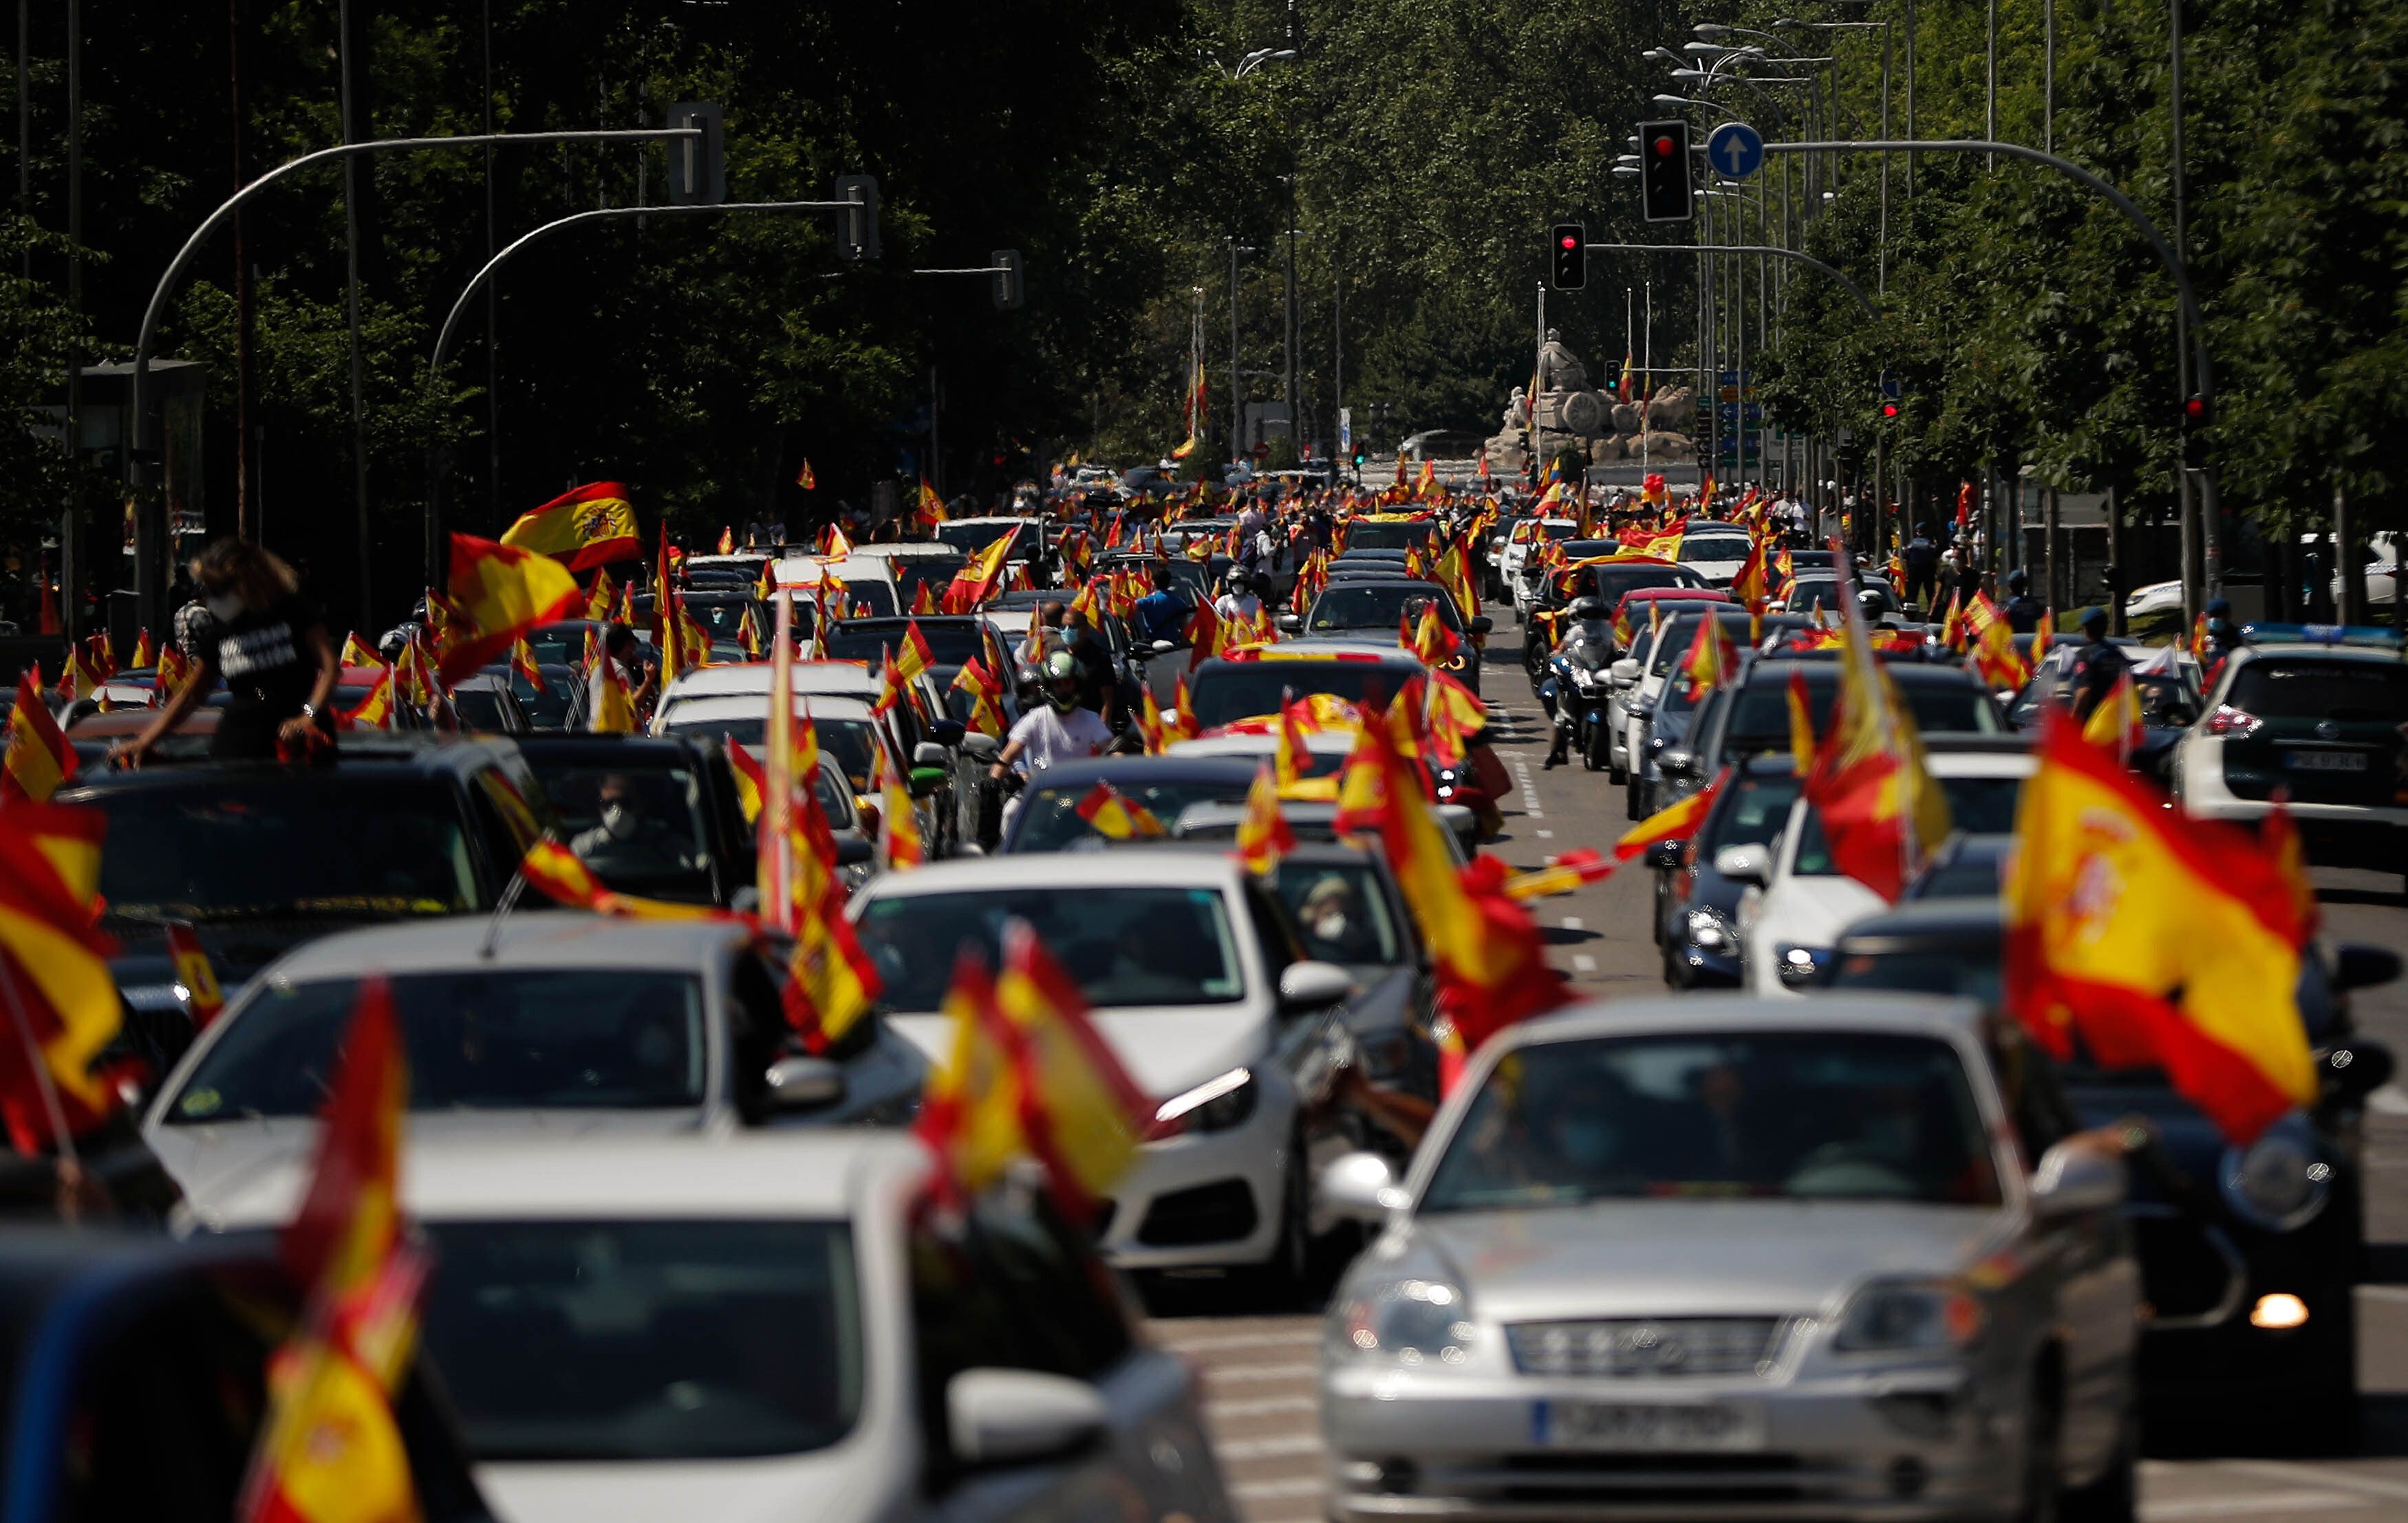 In this image, Spanish flags wave from several long lines of cars